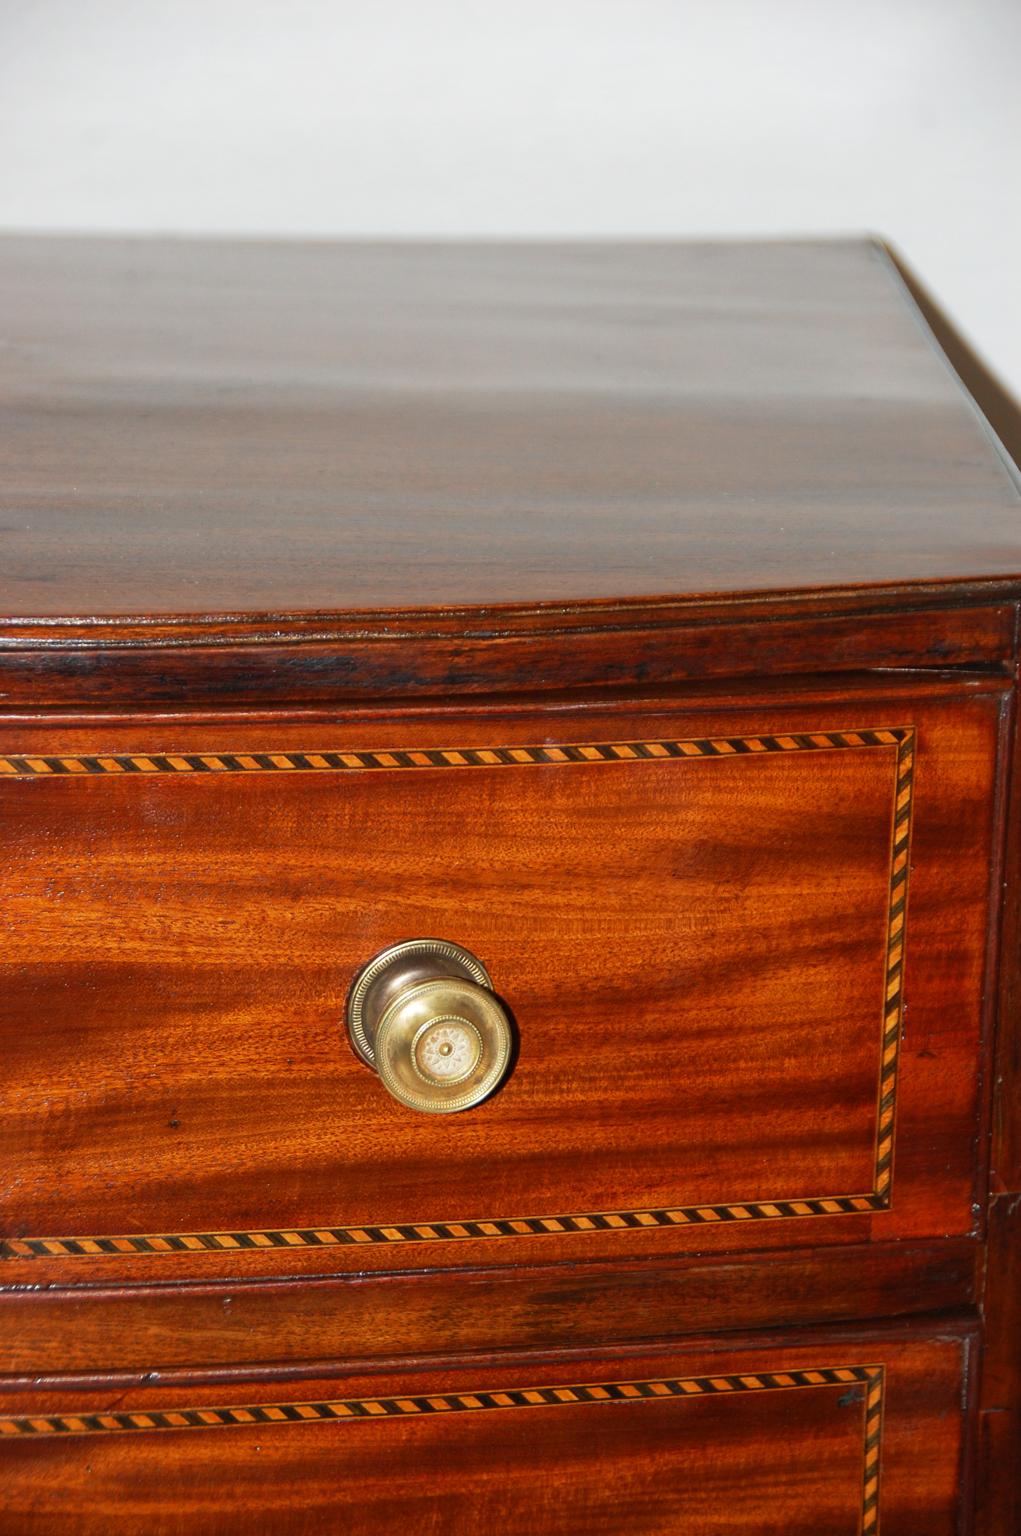 English diminutive Georgian period Hepplewhite bowfront mahogany chest of three graduated drawers with satinwood and ebony stringing, French splay feet, shaped skirt, molded edges, inlaid bone escutcheons. At 27 Inches wide, this quite small chest